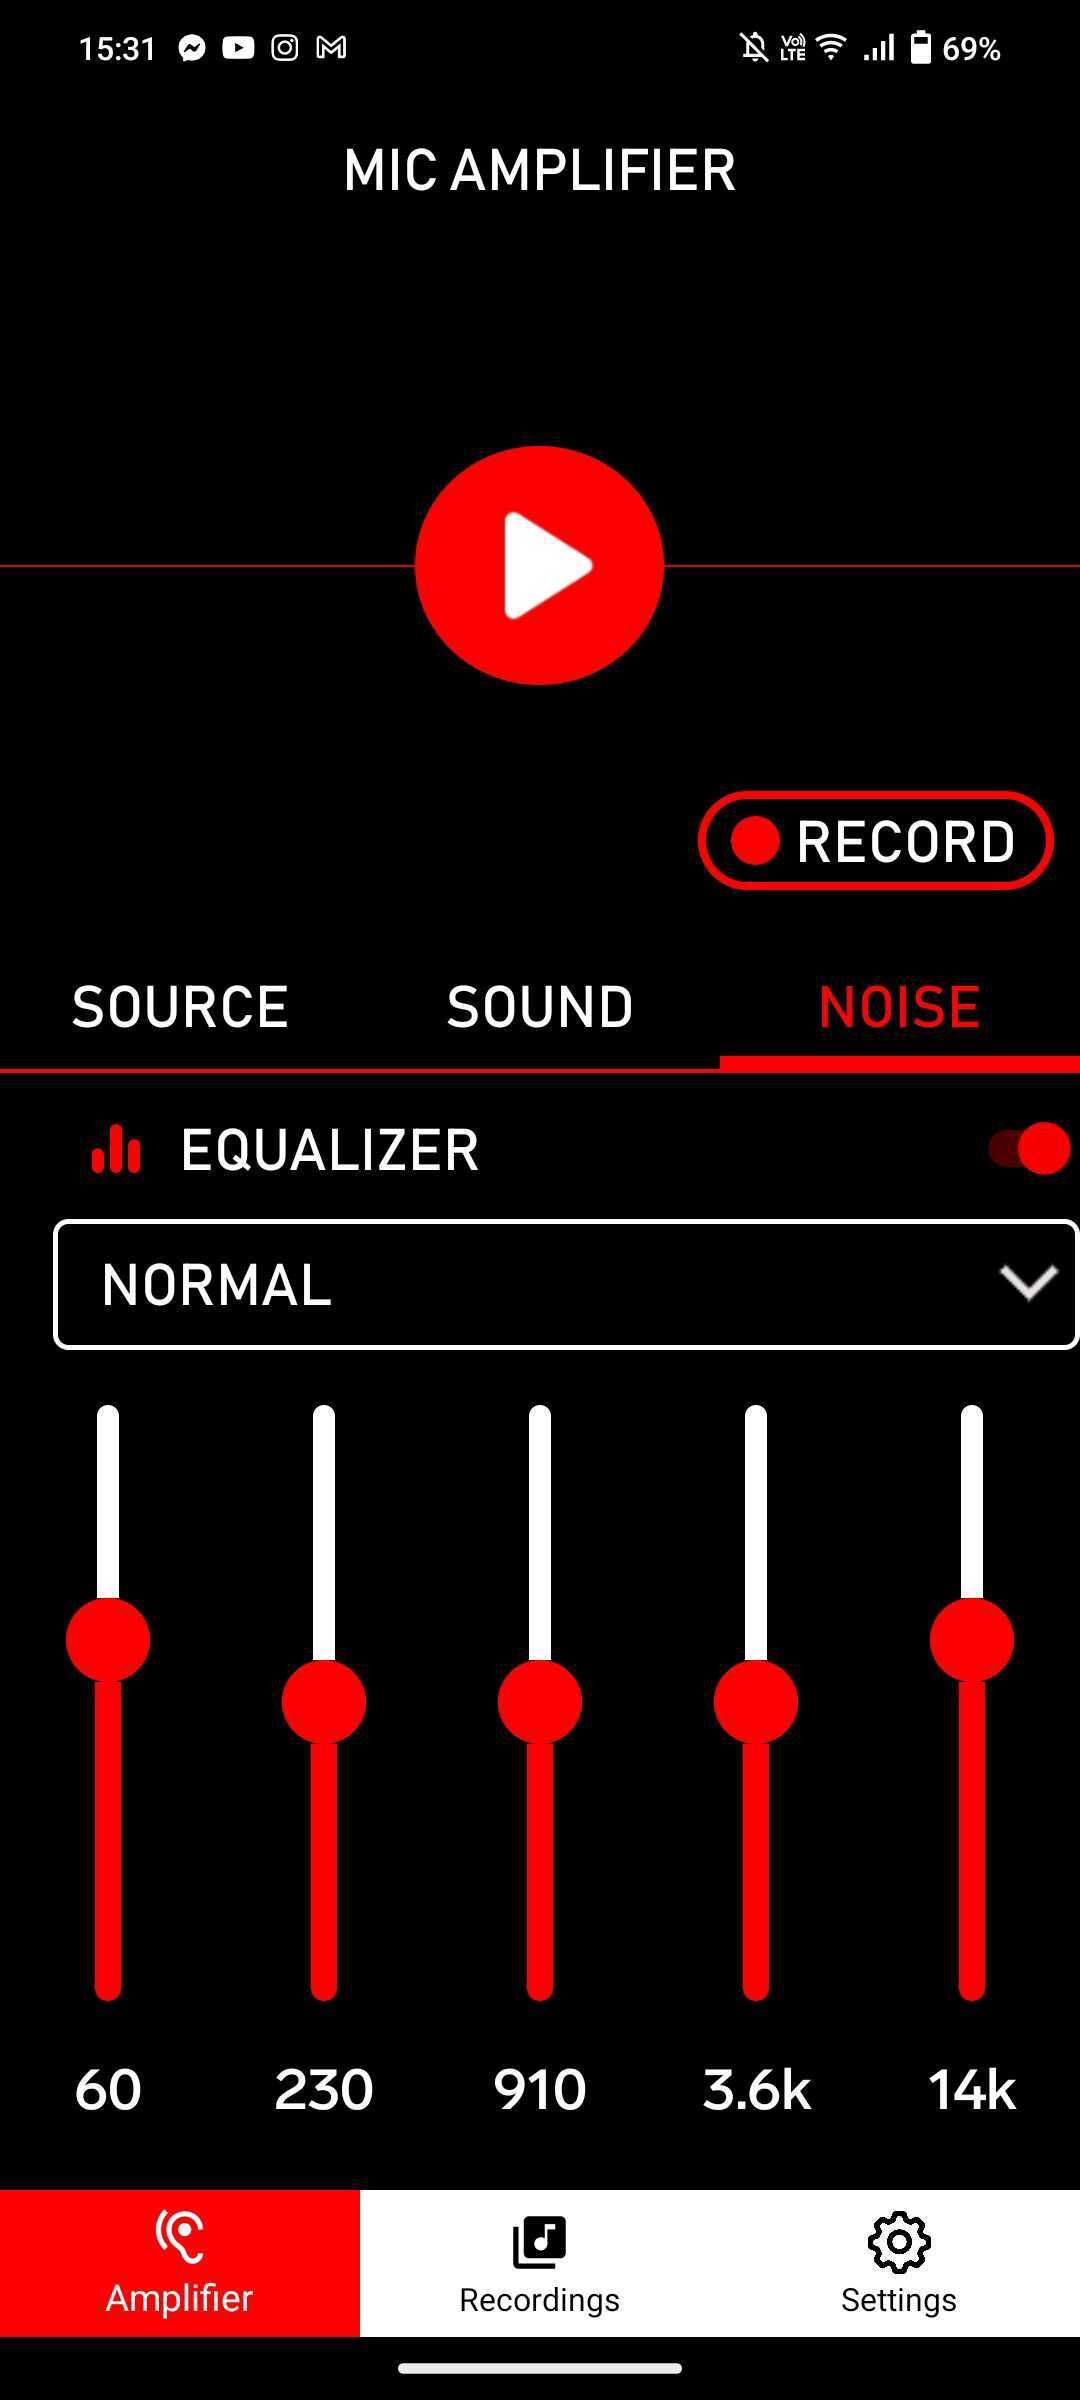 Mic Amplifier on Android equalizer